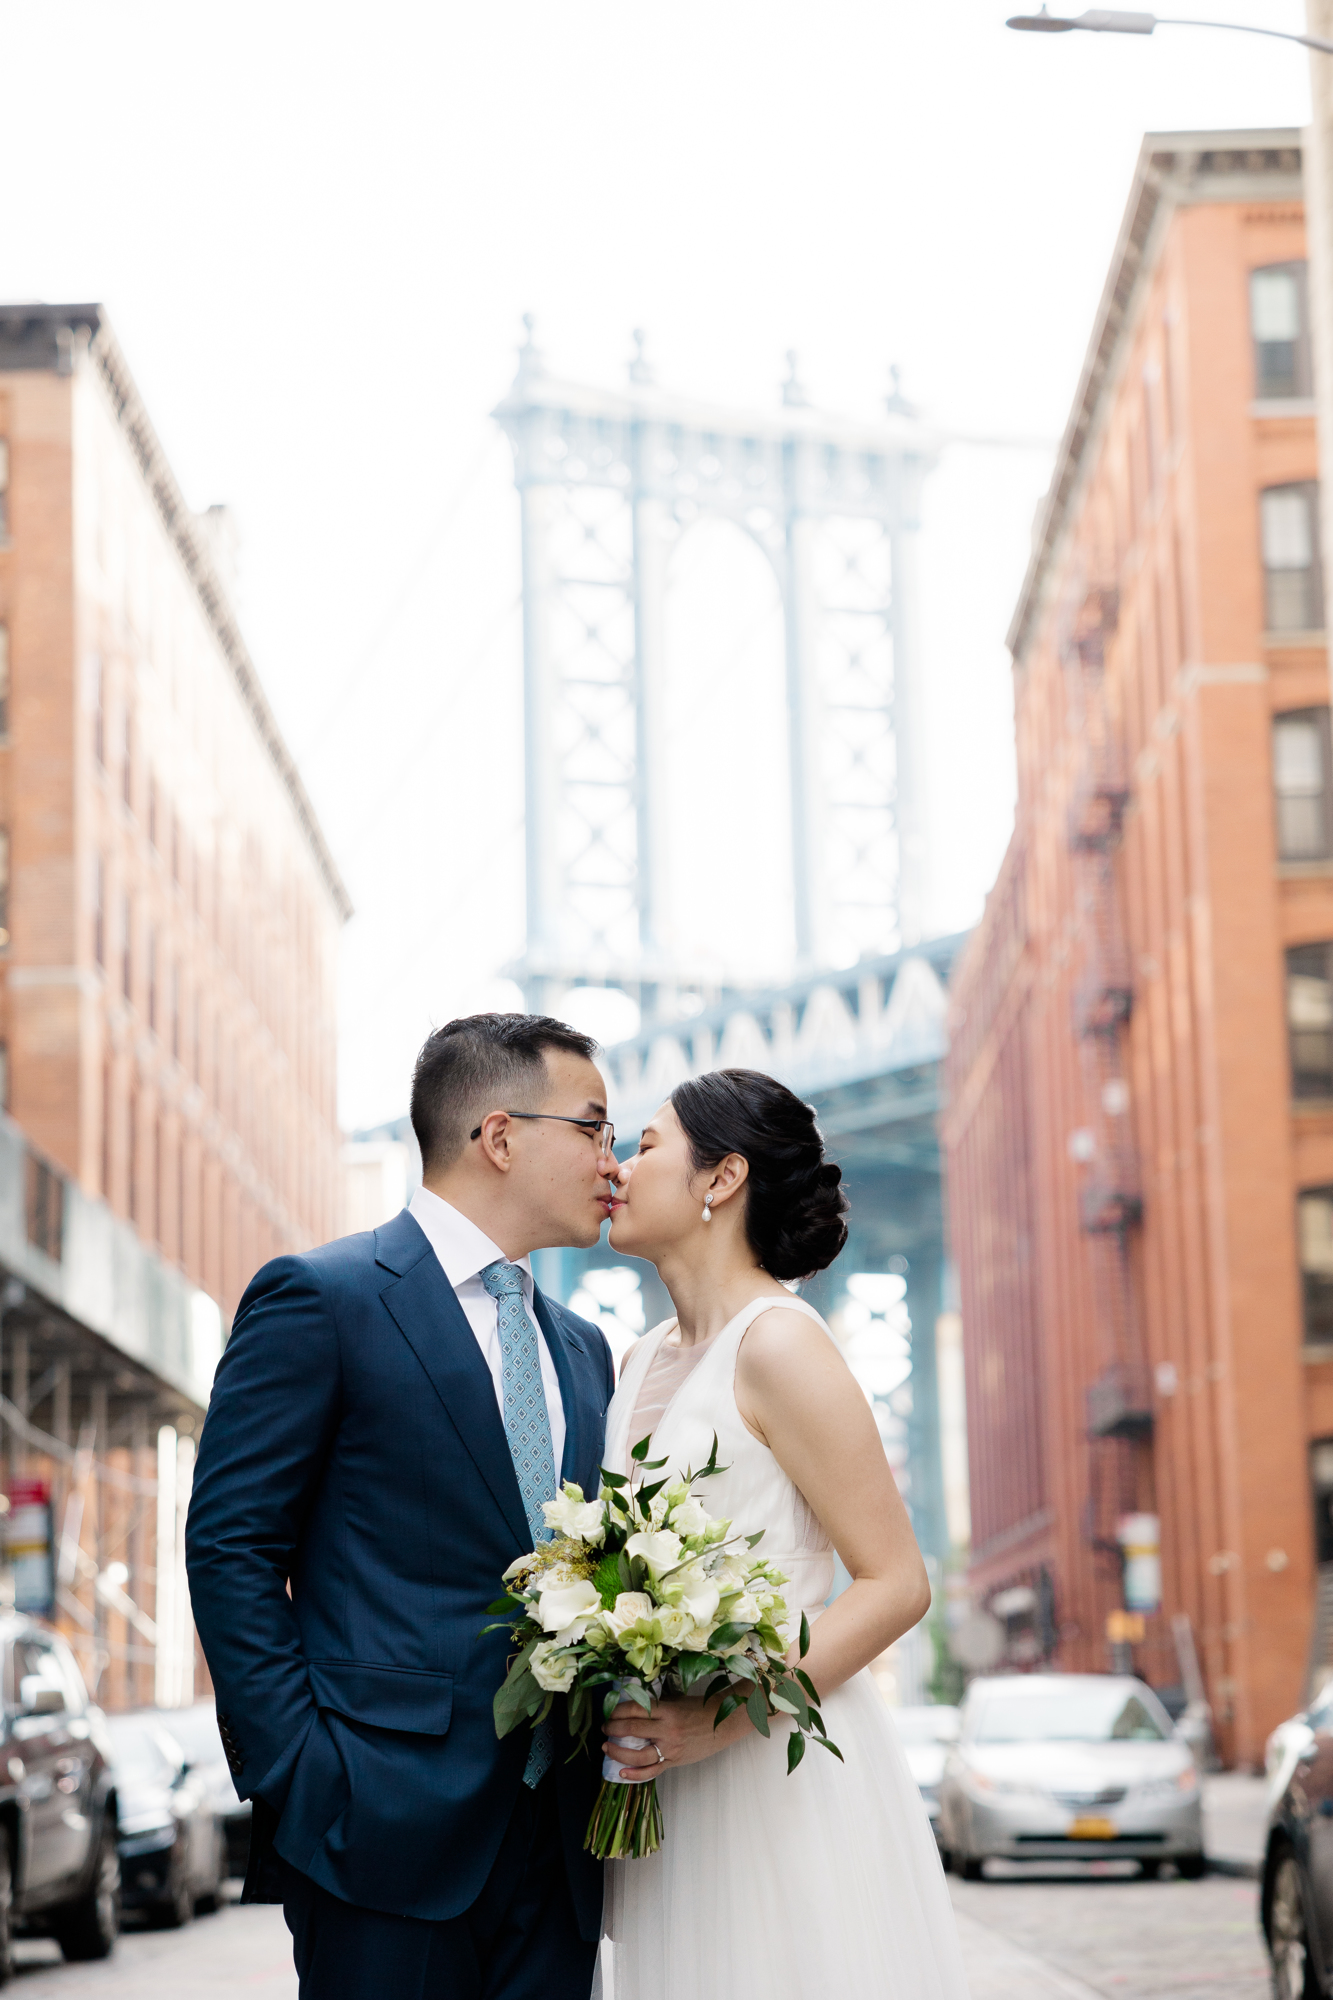 Glowing Photos of New York Elopement in DUMBO and Central Park